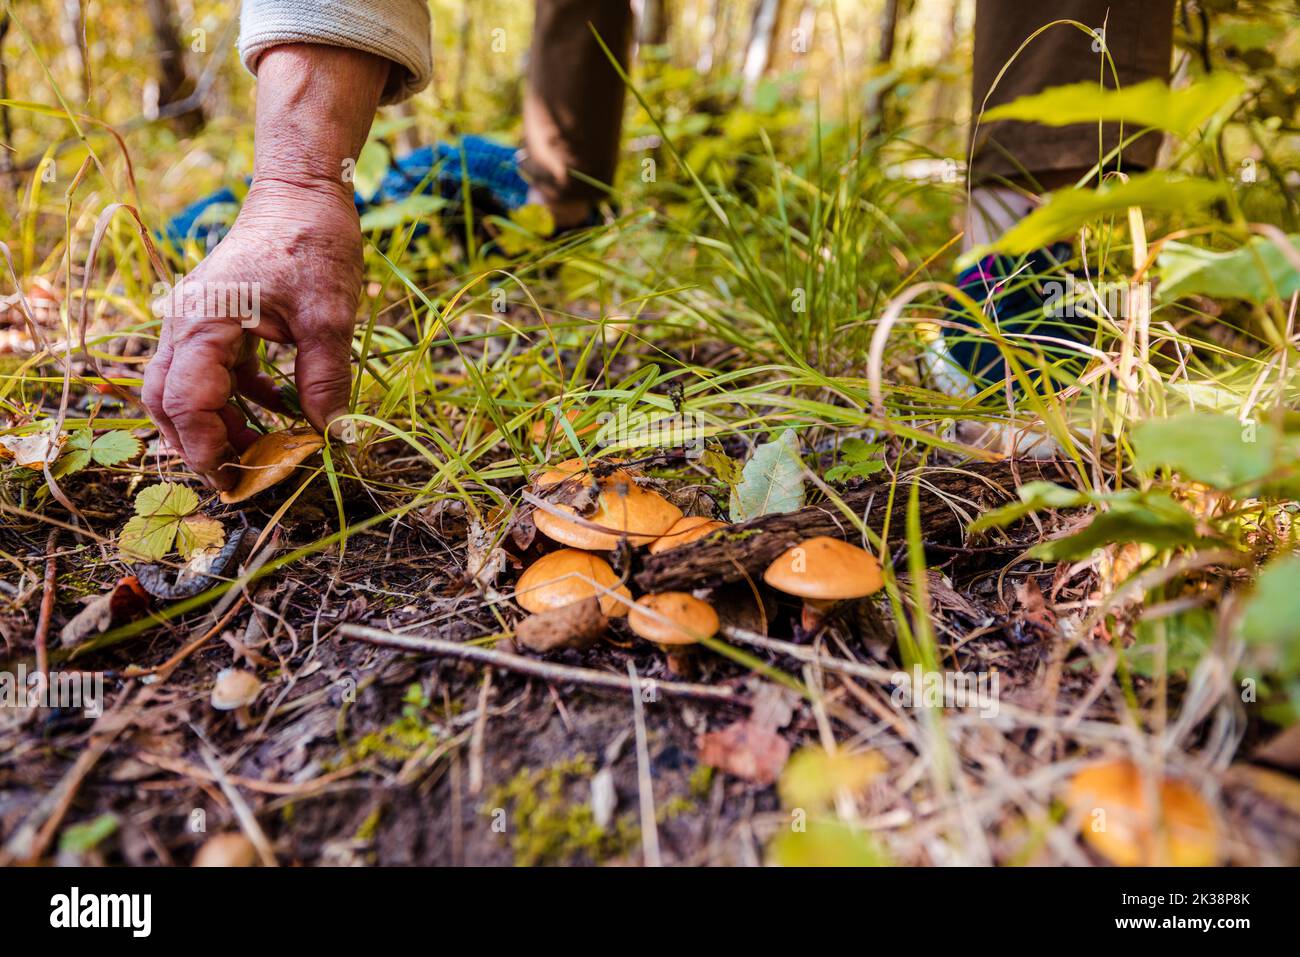 Woman collecting mushrooms in autumn forest Stock Photo